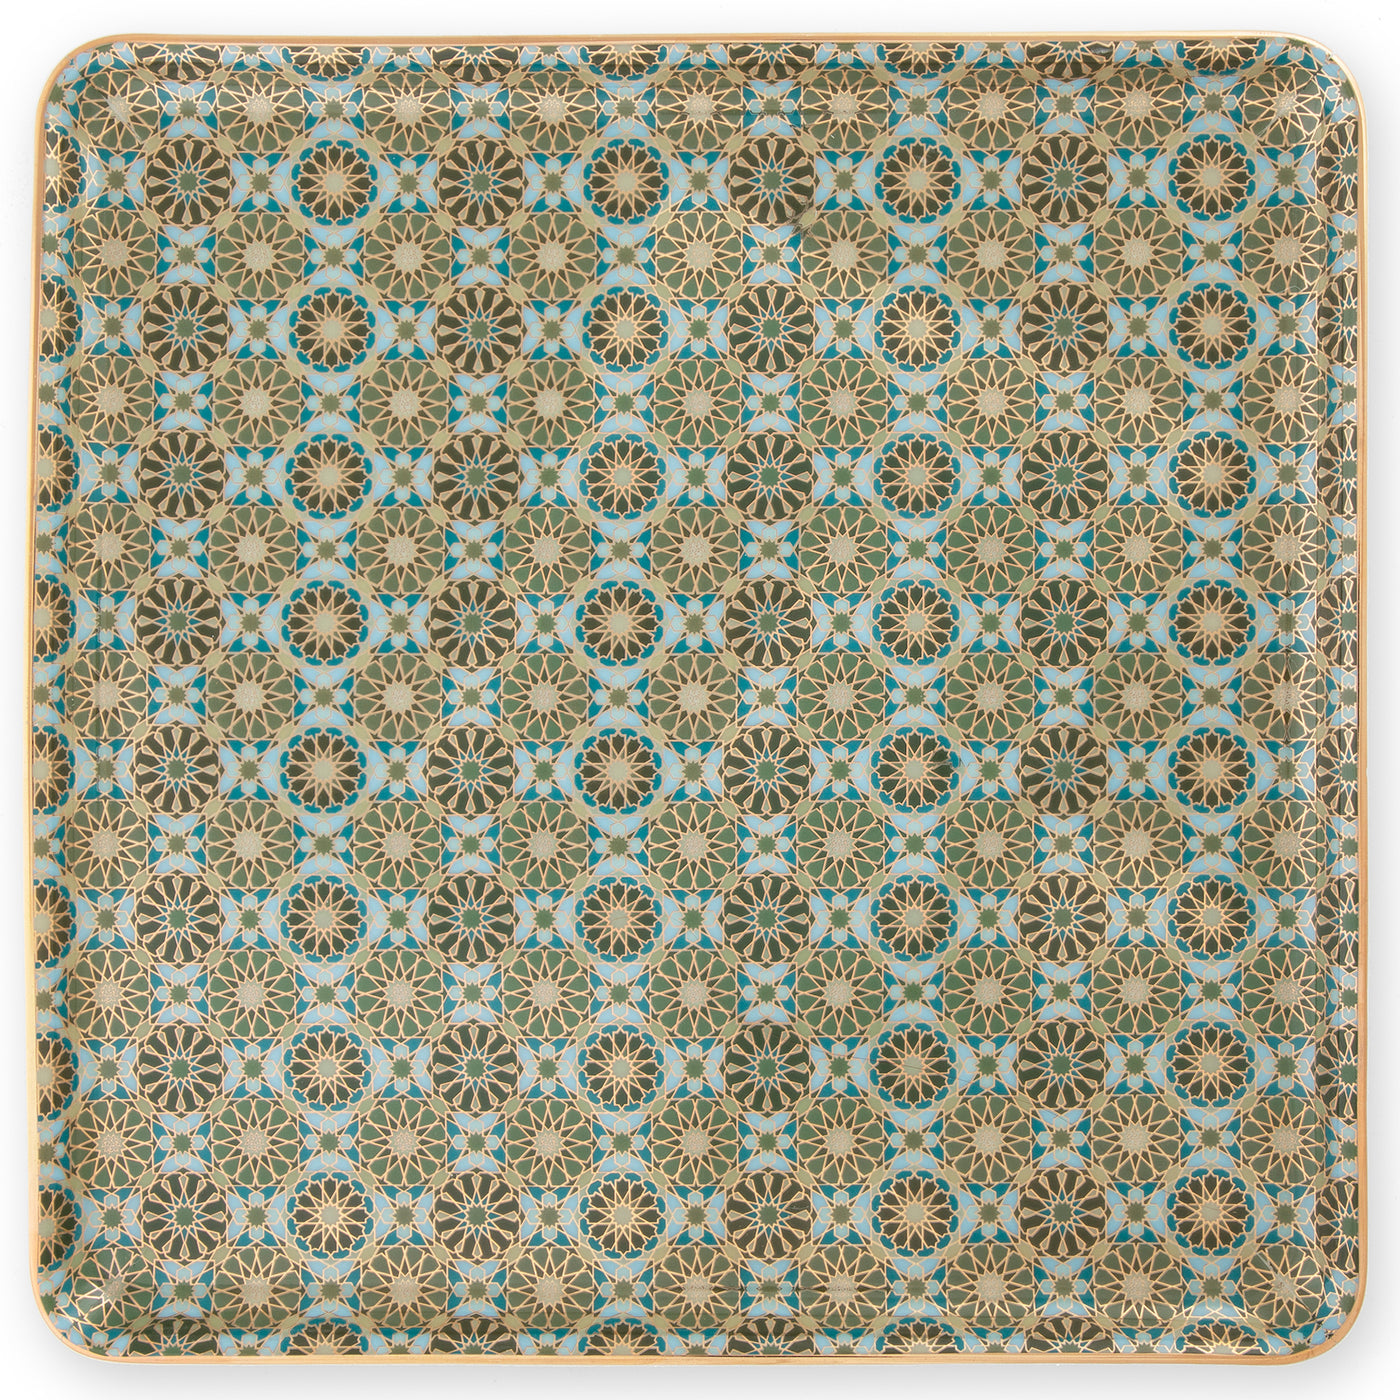 Shop The Latest Collection Of Images D'Orient Square Platter Large Andalusia - 25 Cm - Por-125002 In Lebanon